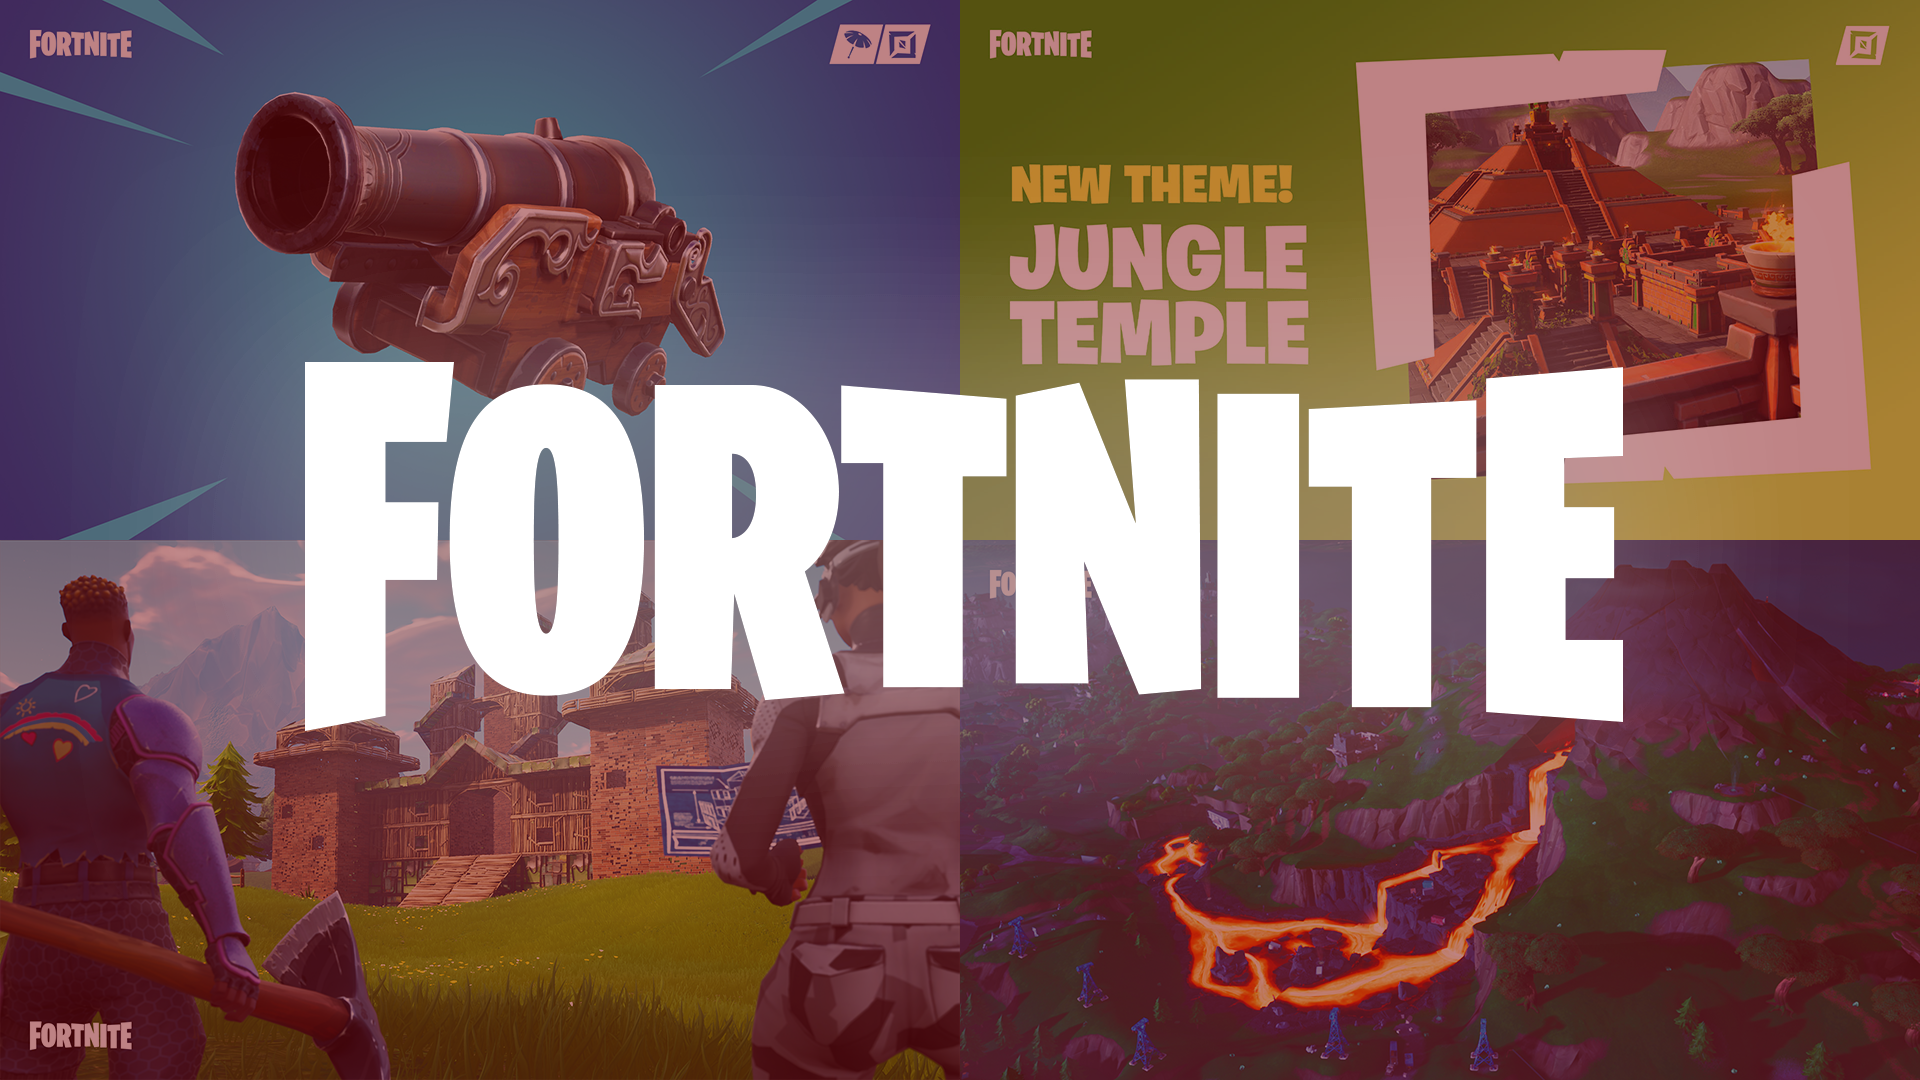 Fortnite Season 8 Map Battle Pass Patch Notes Skins And More - fortnite season 8 map battle pass patch notes skins and more from new release sporting news canada